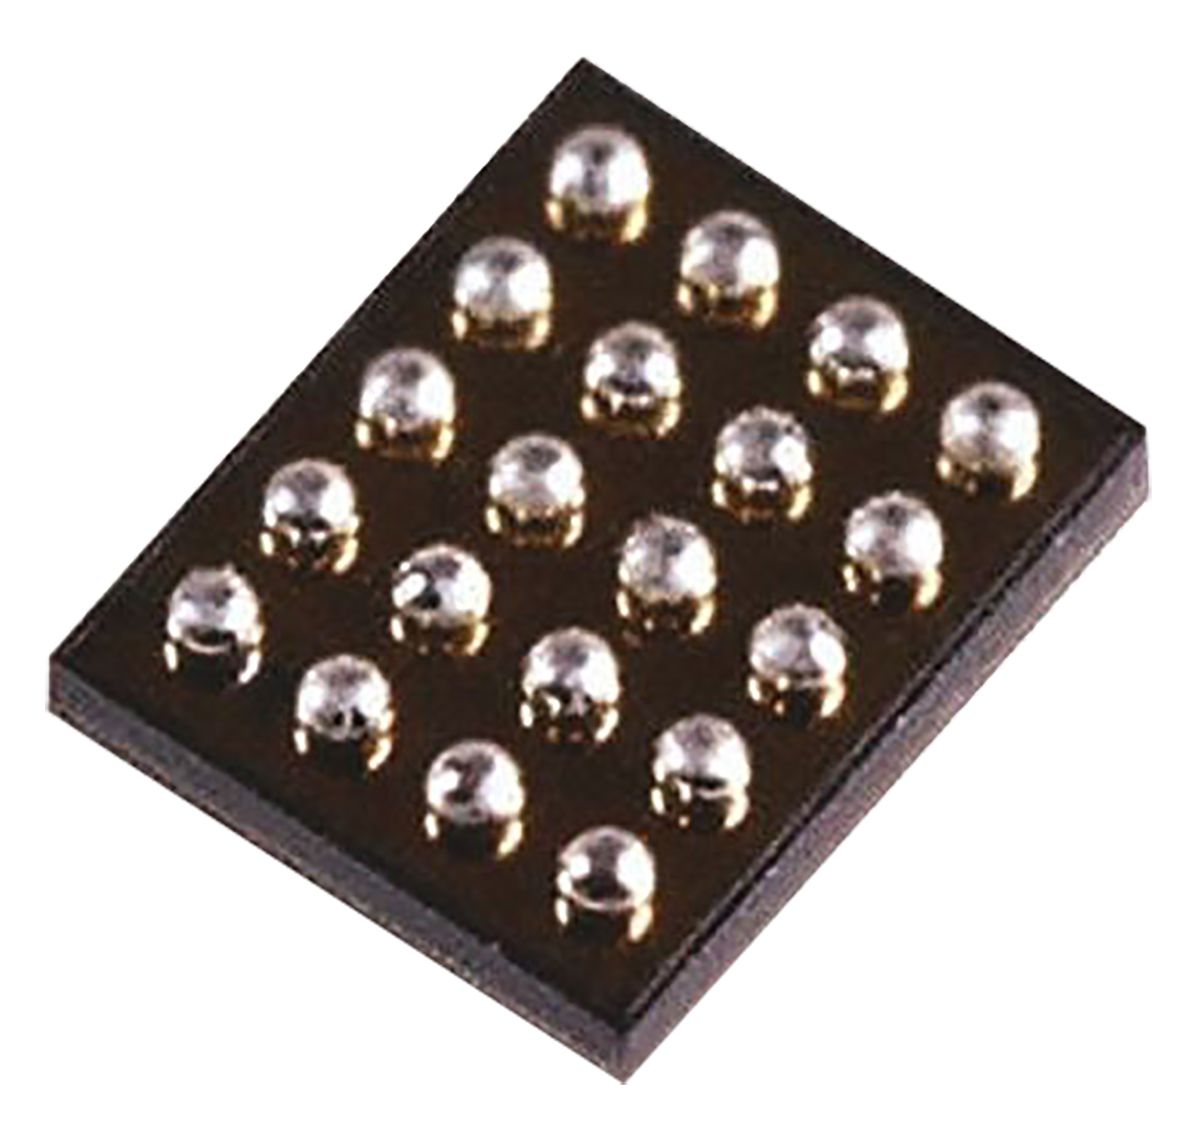 AD8233ACBZ-R7,Analogue Front End IC 14 bit, 20-Pin WLCSP